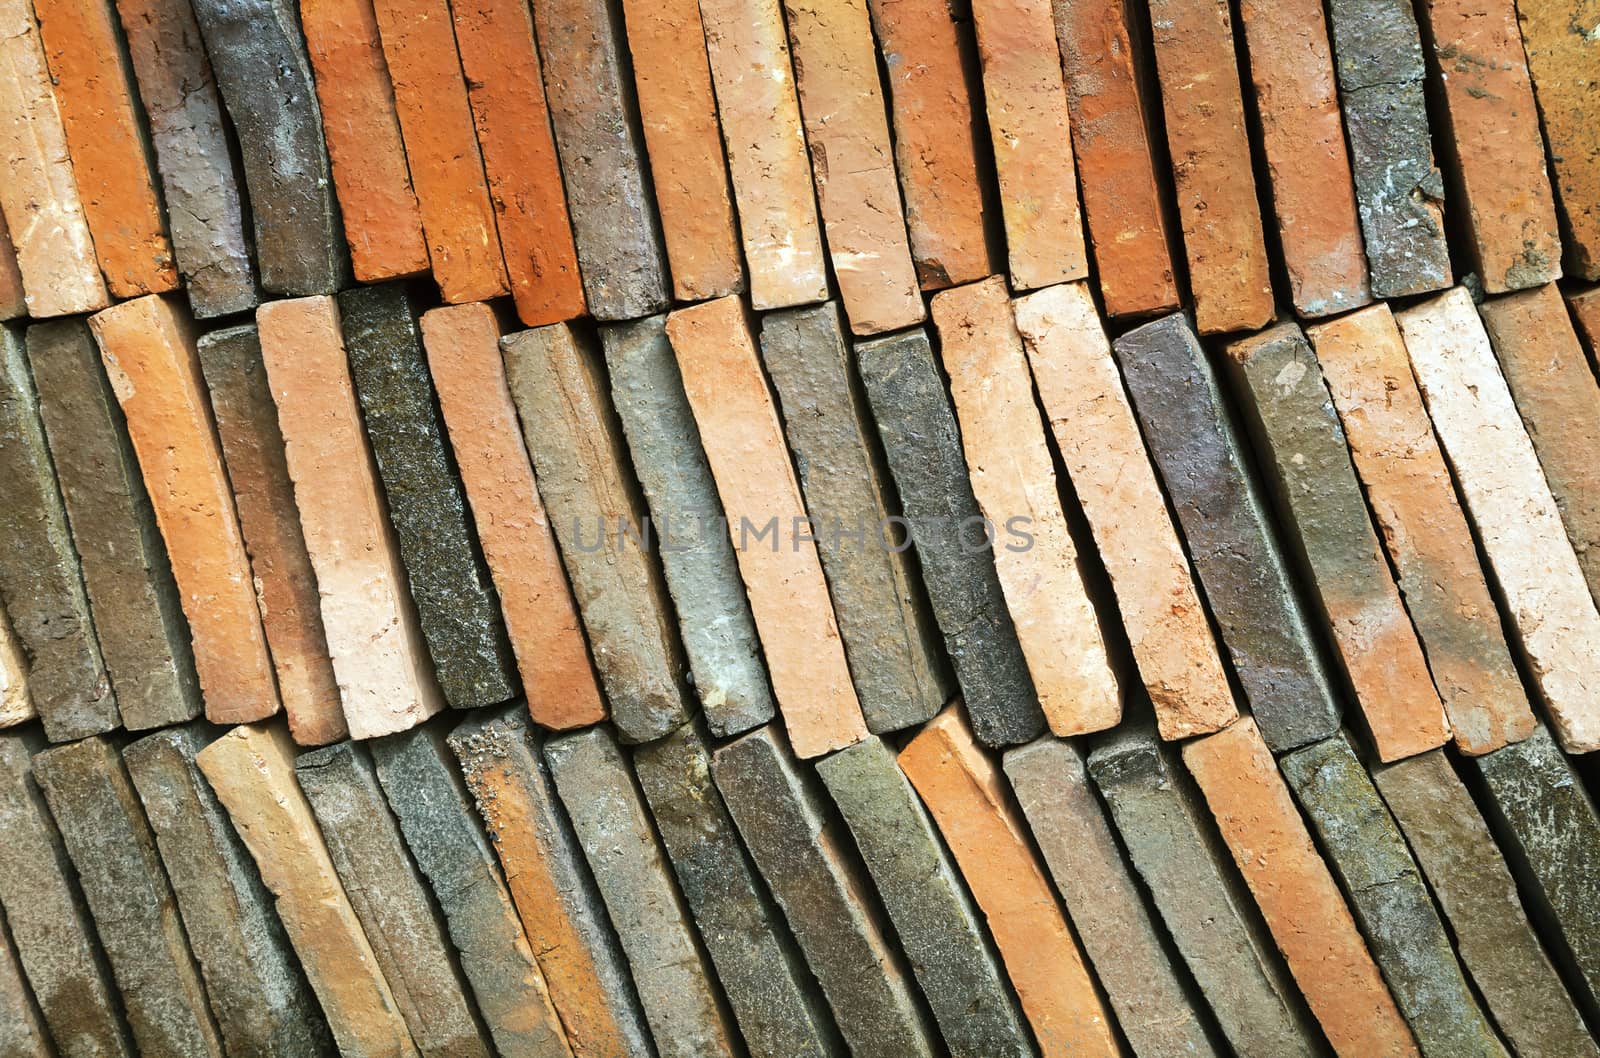 Background of old clay tiles in a pile for roof construction